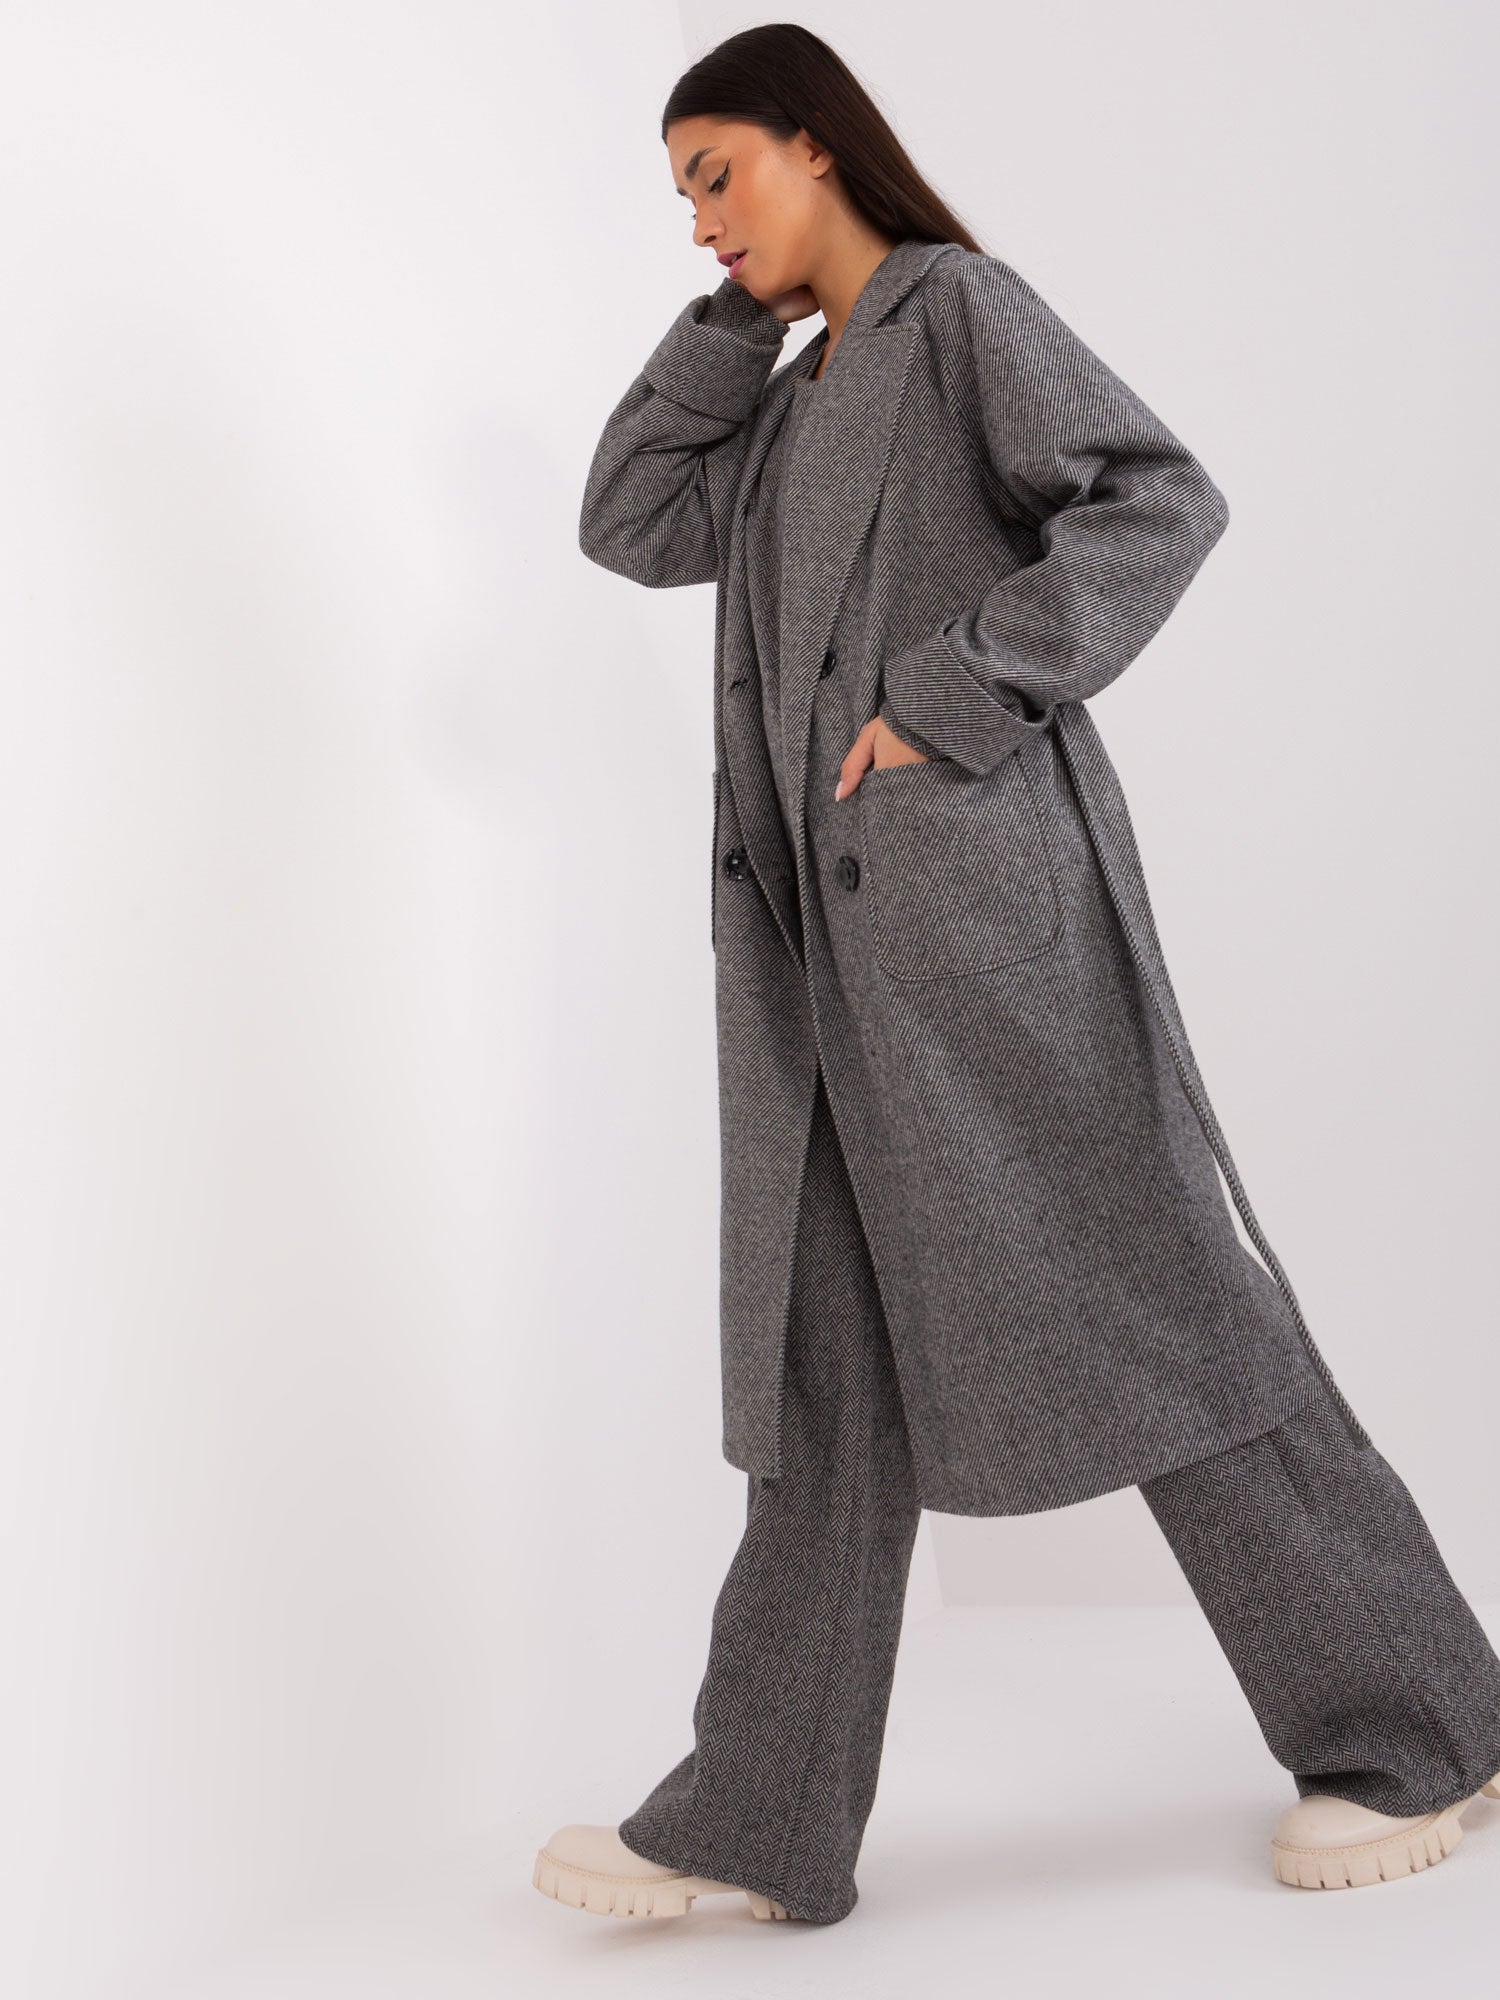 Belted Coat Grey Transitional Striped